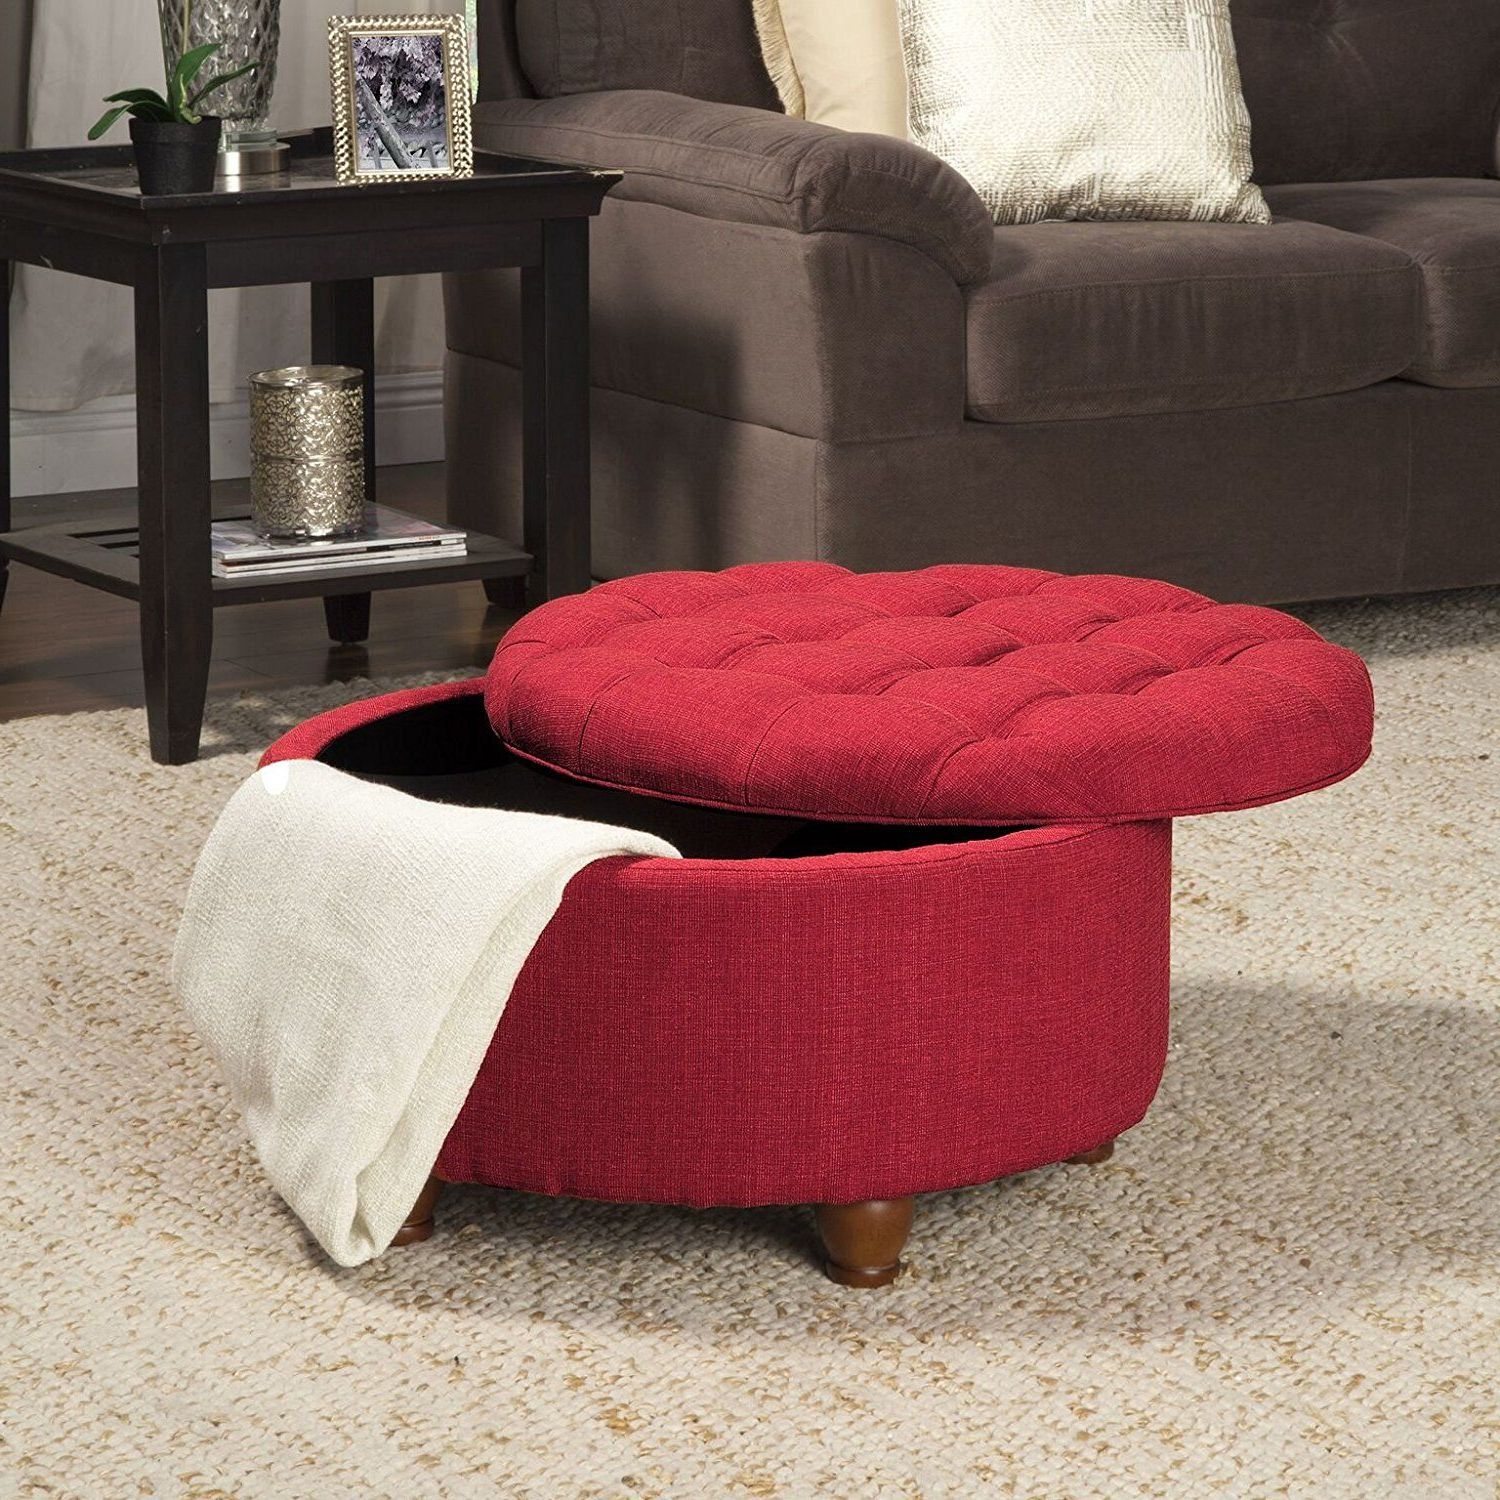 Gray Fabric Tufted Oval Ottomans Pertaining To Preferred Amazon: Kinfine Round Textured Tufted Storage Ottoman, Red: Kitchen (View 3 of 10)